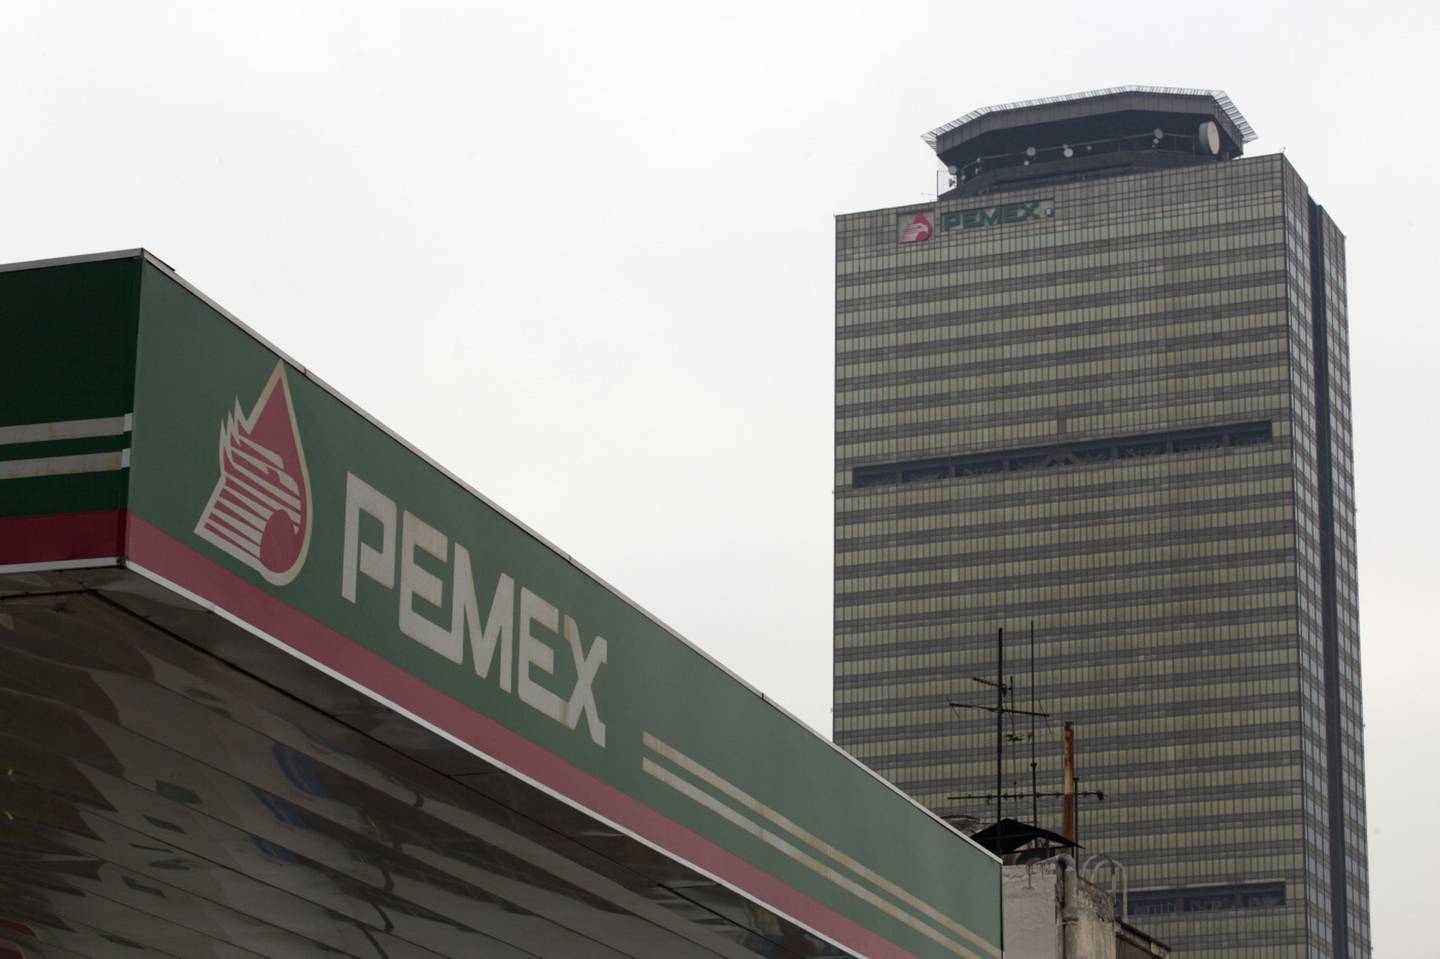 A Petroleos Mexicanos (Pemex) gas station, lower left, stands near the state-run oil company's headquarters building in Mexico City, Mexico, on Friday, March 6, 2015. Oil contracts worth more than $20 million will be open to public auction to encourage international participation as Mexico's invites foreign investment following the end of Pemex's production monopoly, according to a document published in Mexico's official gazette. Photographer: Susana Gonzalez/Bloomberg